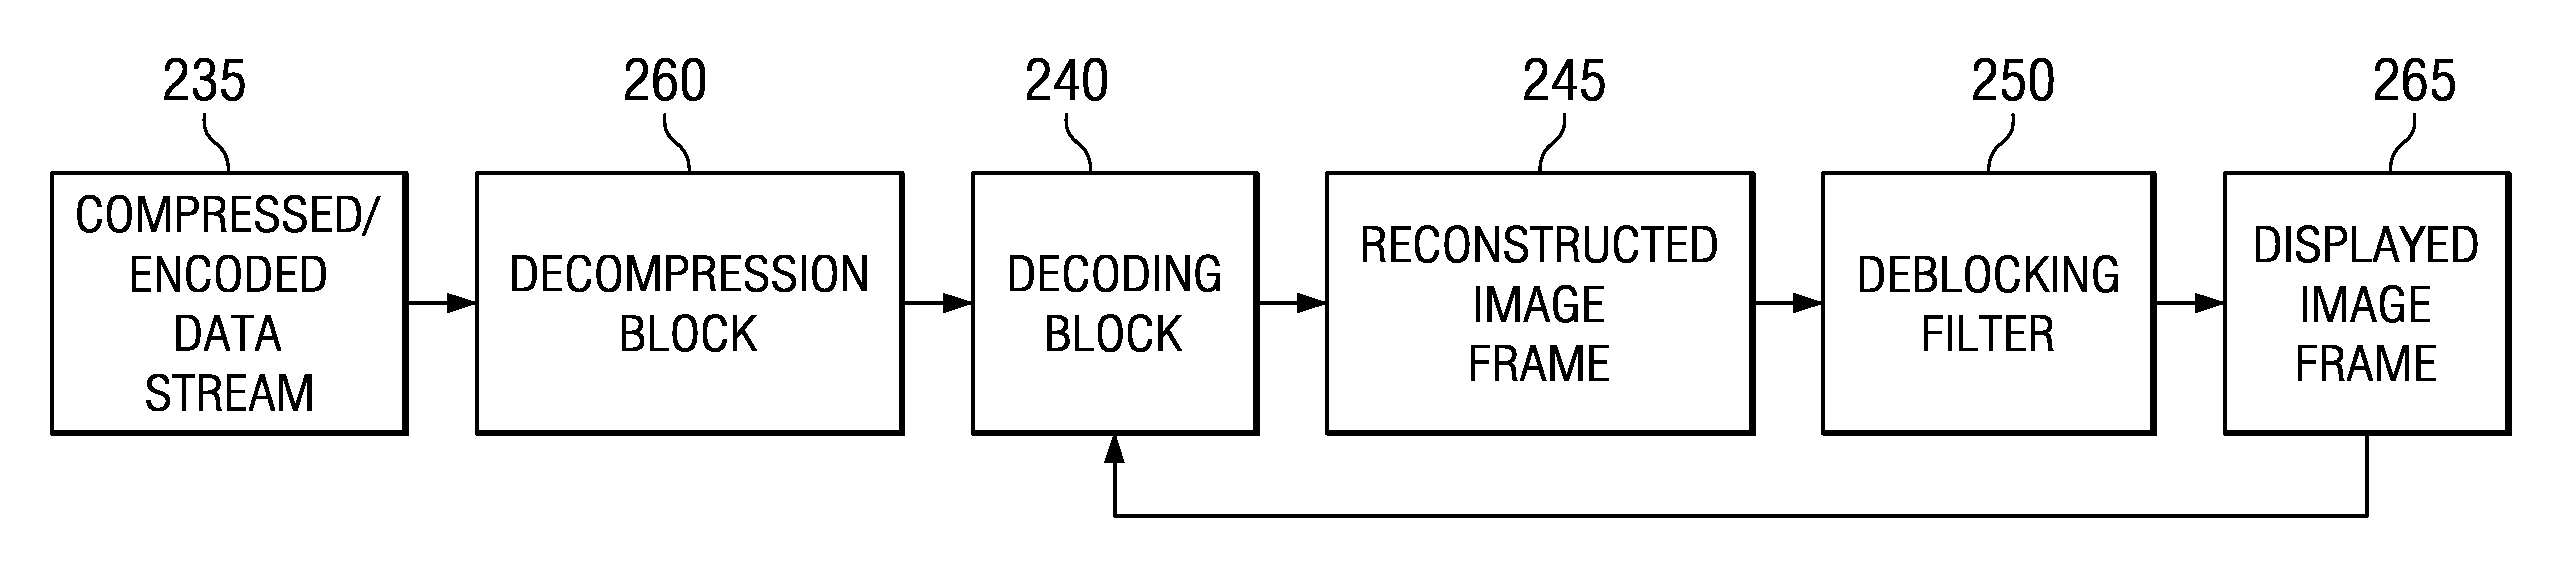 Throughput Performance When Applying Deblocking Filters On Reconstructed Image Frames